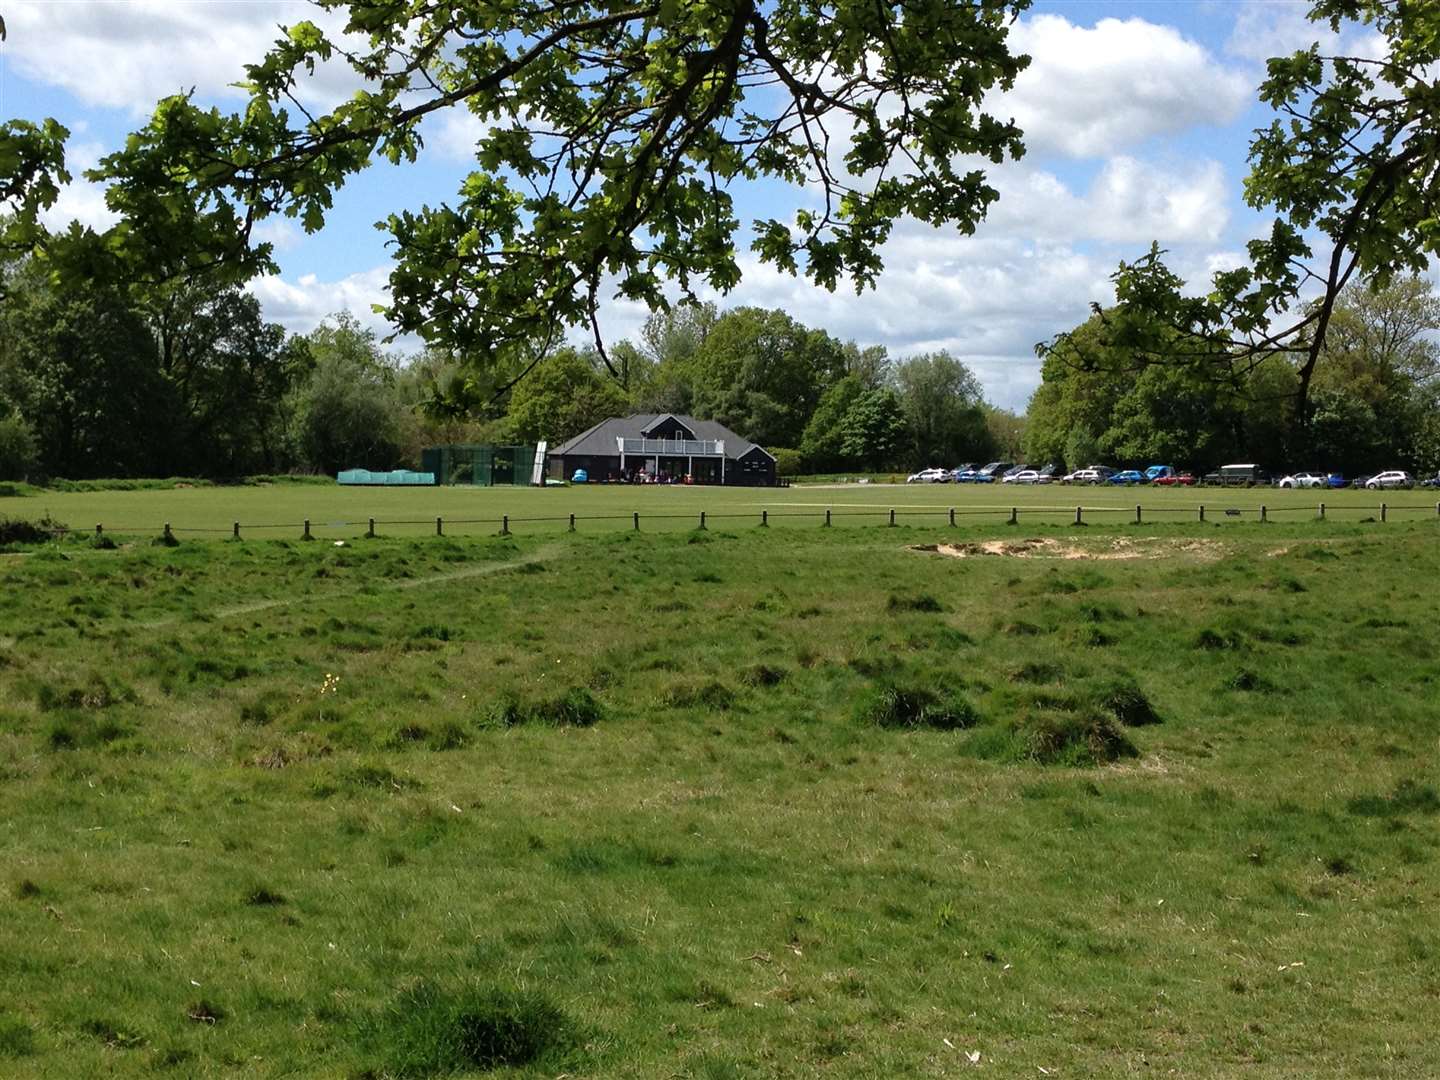 Linden park cricket ground. Picture by Mike Taylor (11905758)